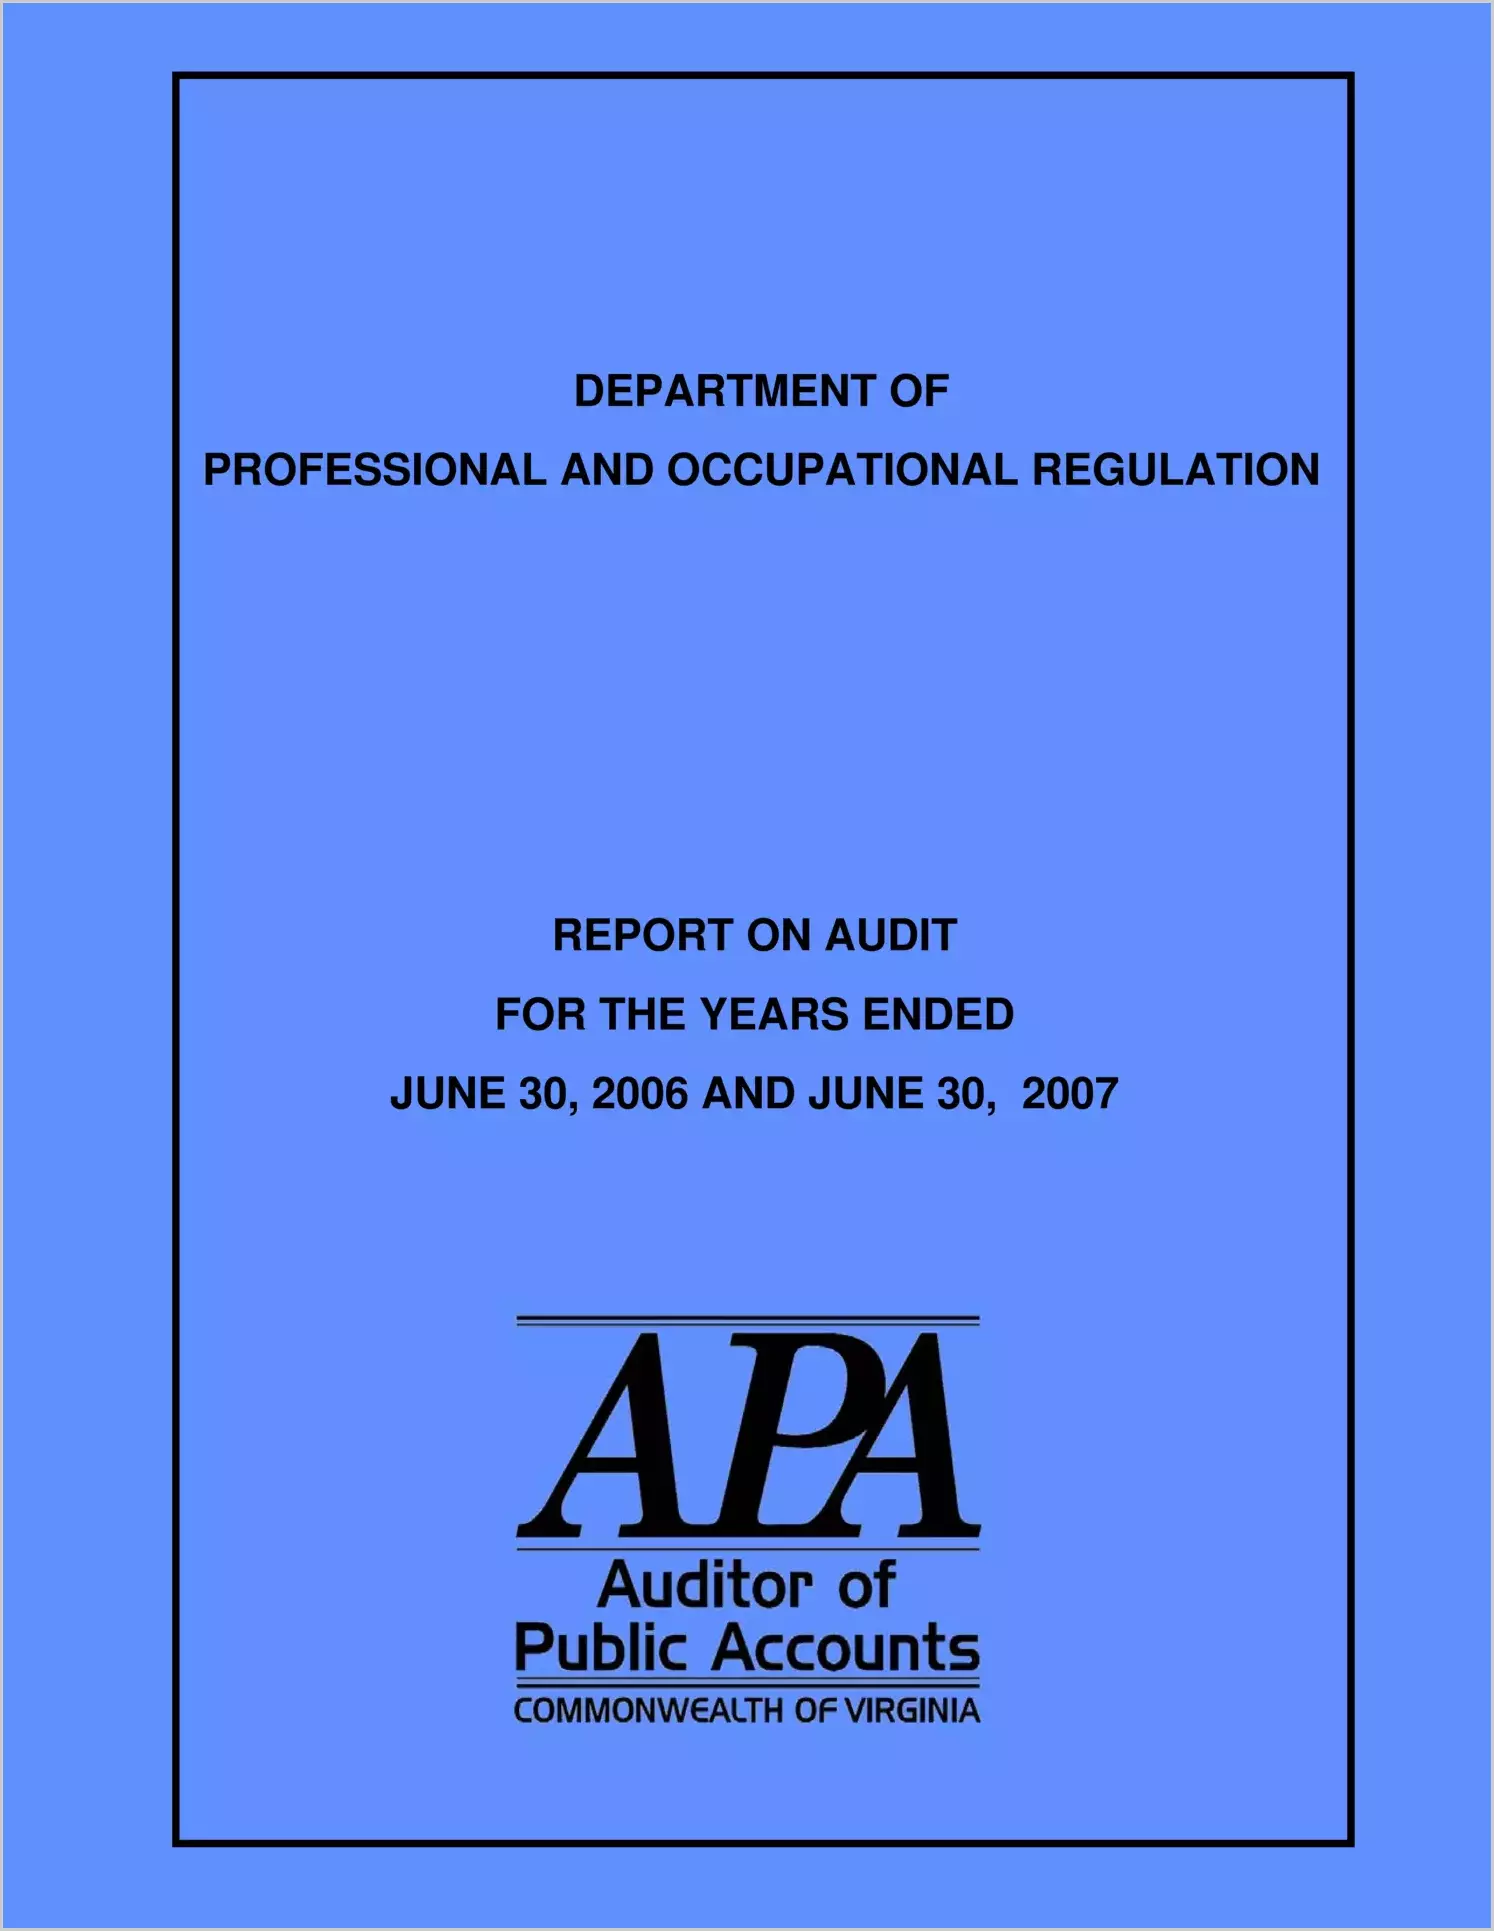 Department of Professional and Occupational Regulation report on audit for the years ended June 30, 2006 through June 30, 2007